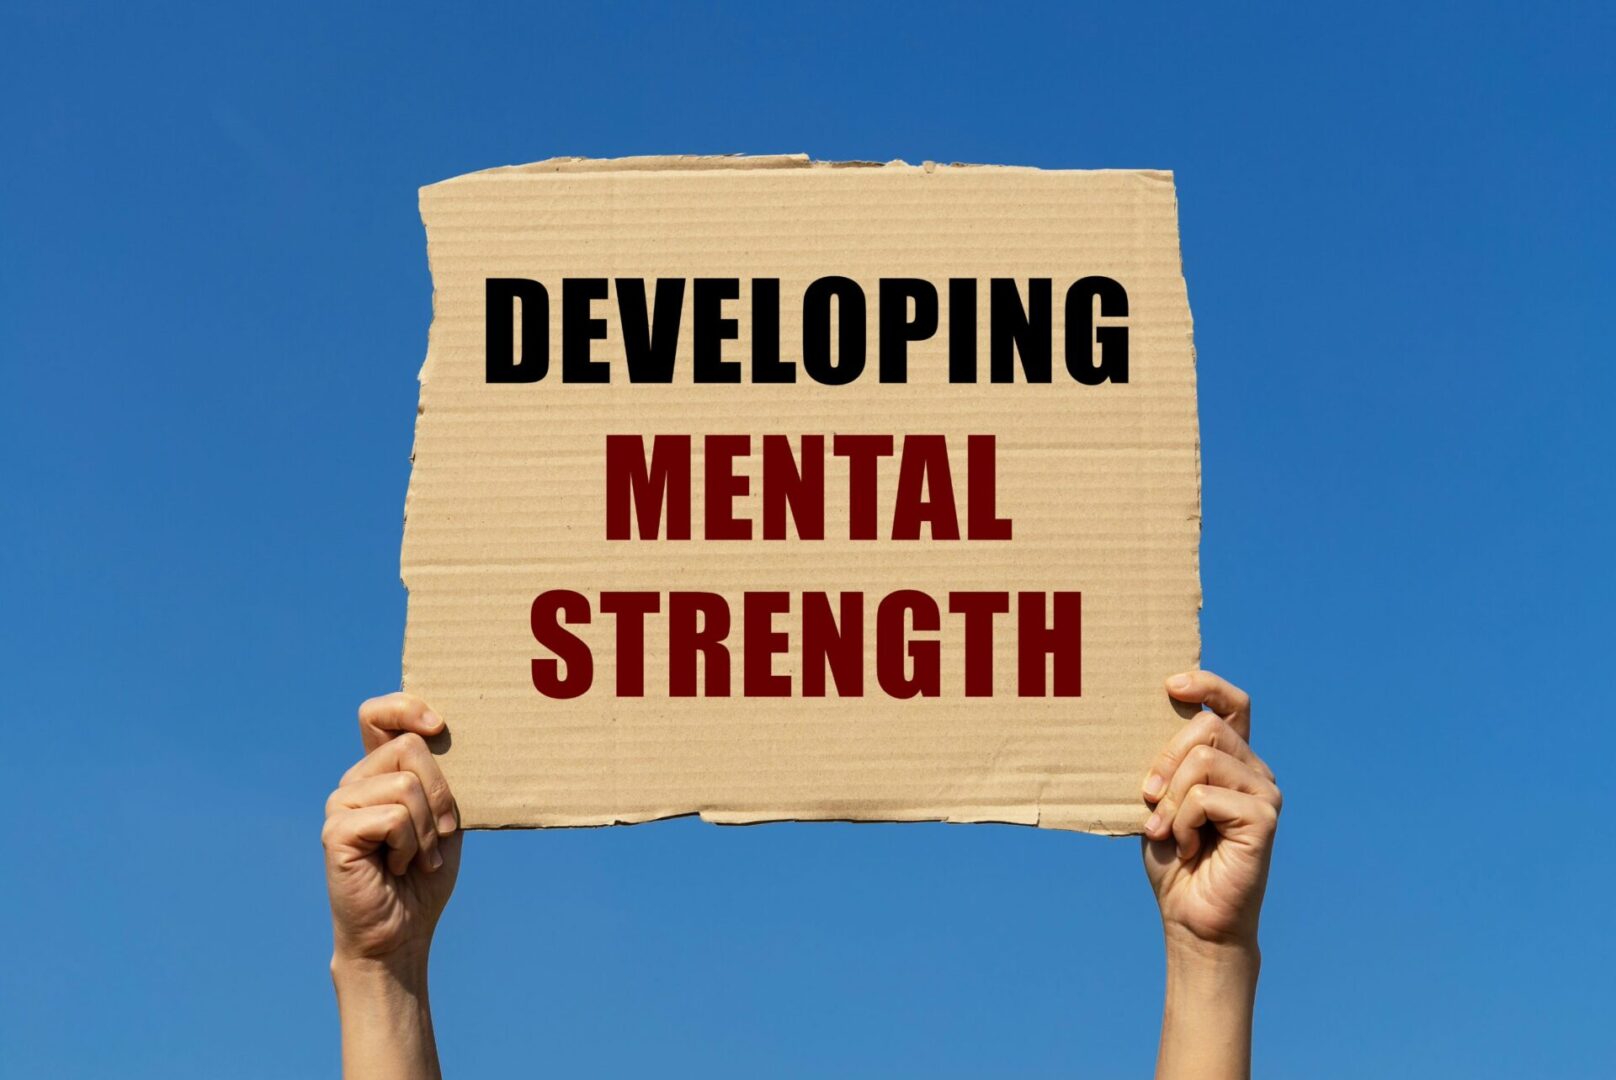 A person holding up a sign that says "developing mental strength" while embracing the concept of lifelong learning.